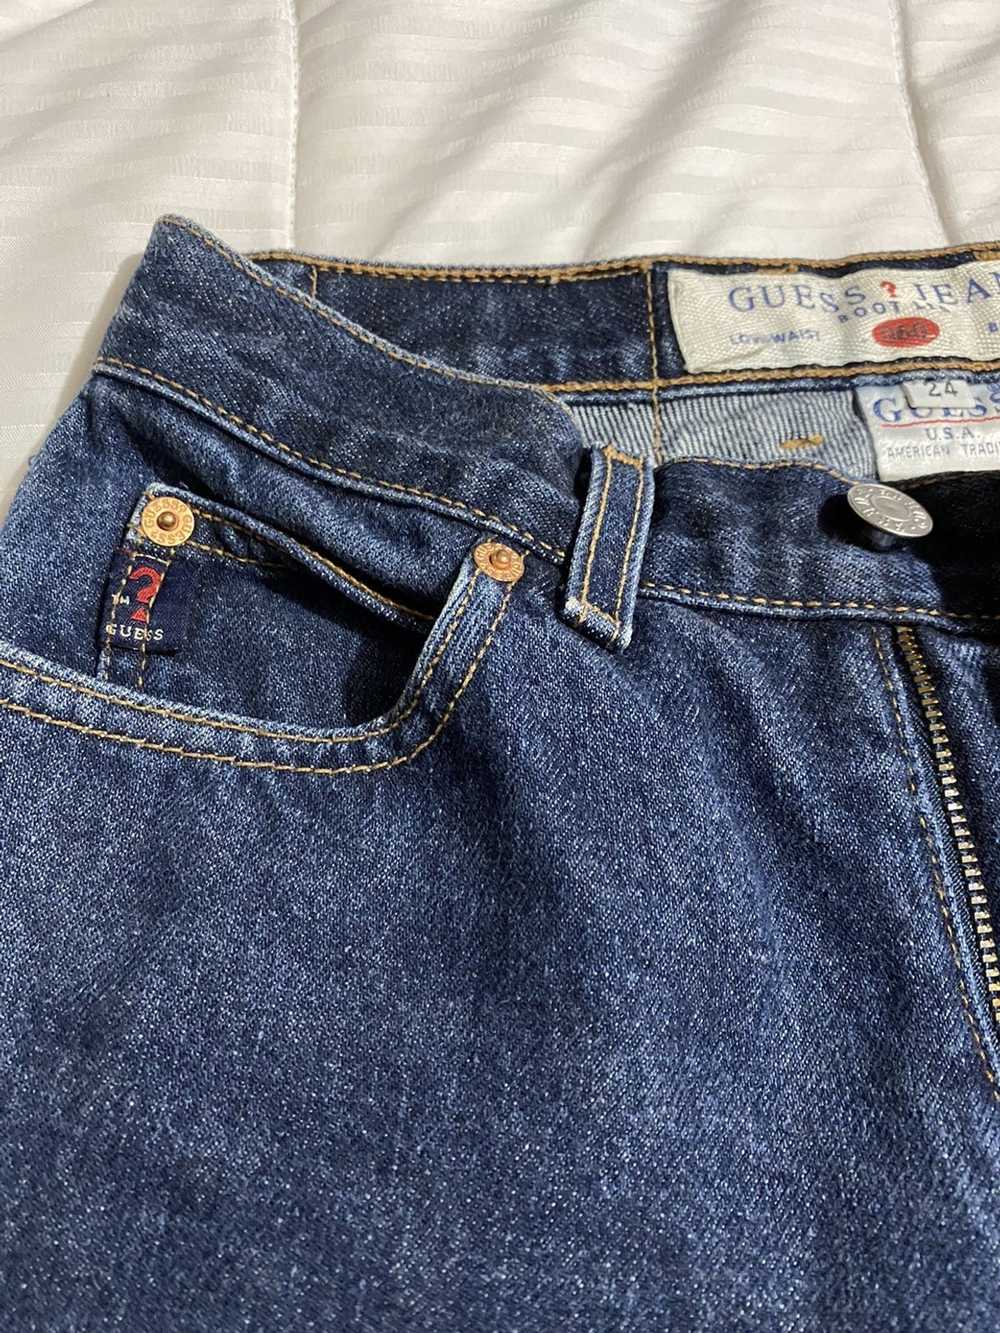 Guess Guess Vintage Jeans - image 1